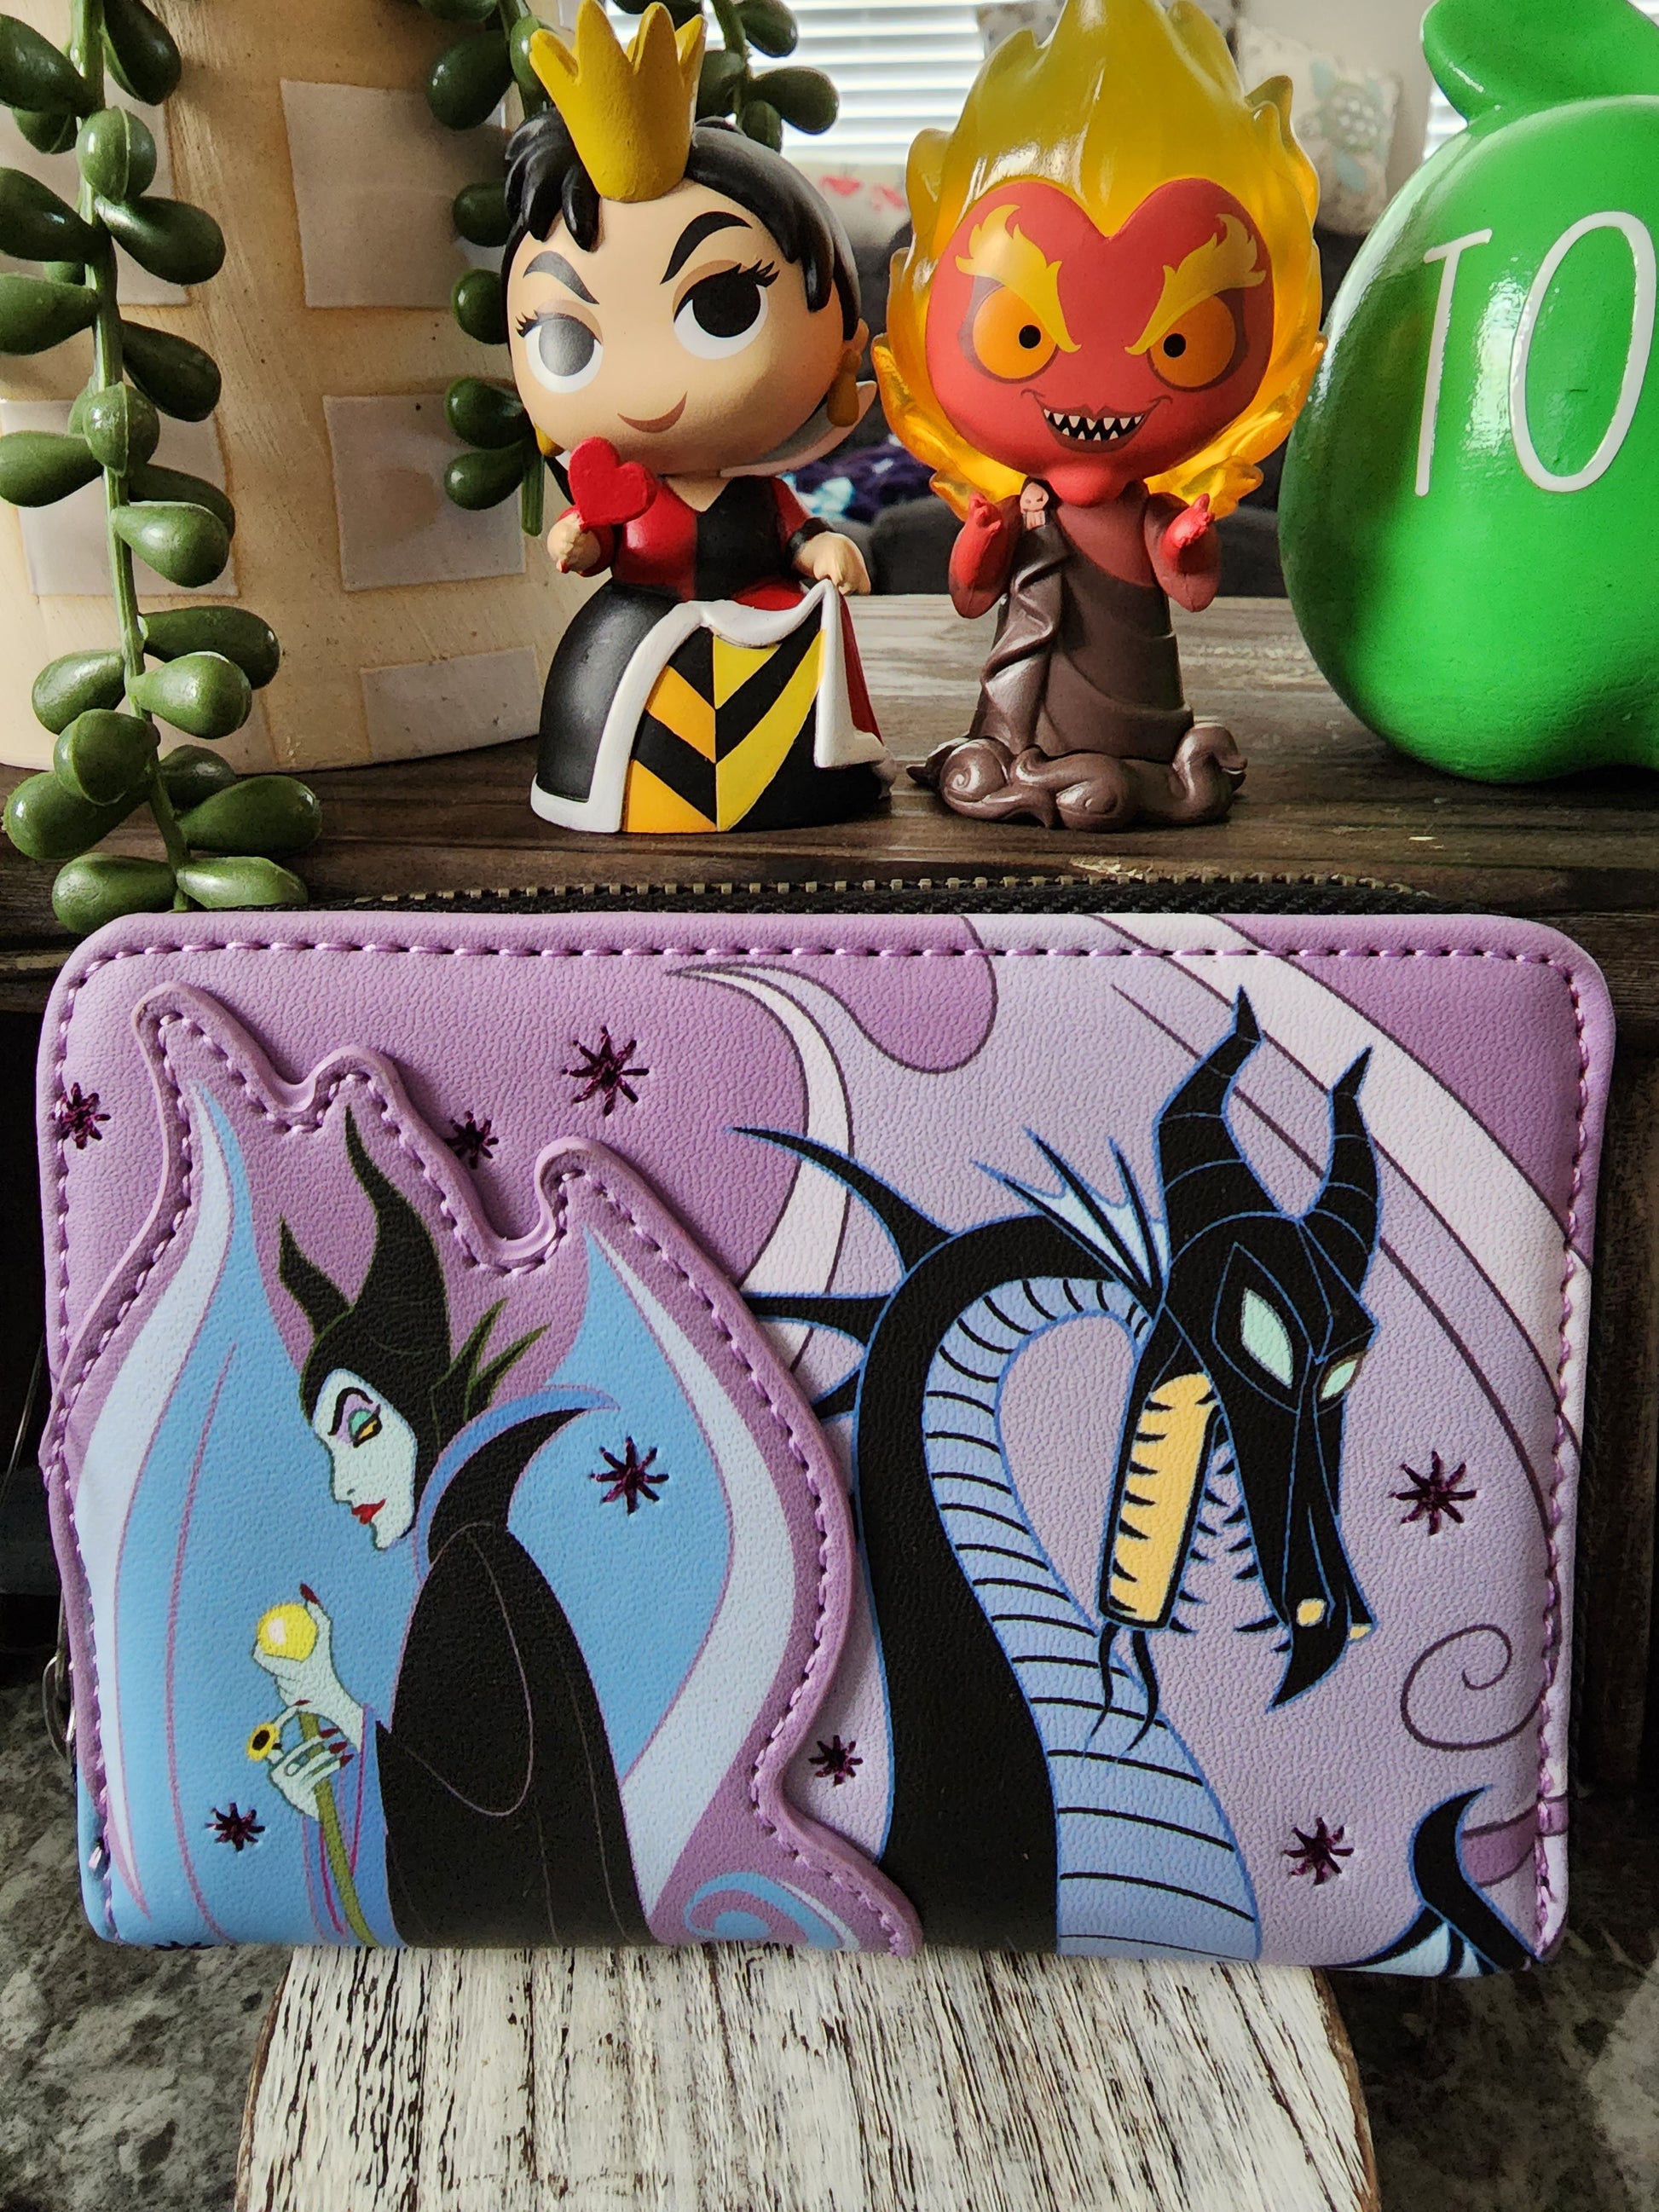 Maleficent Loungefly Wallet